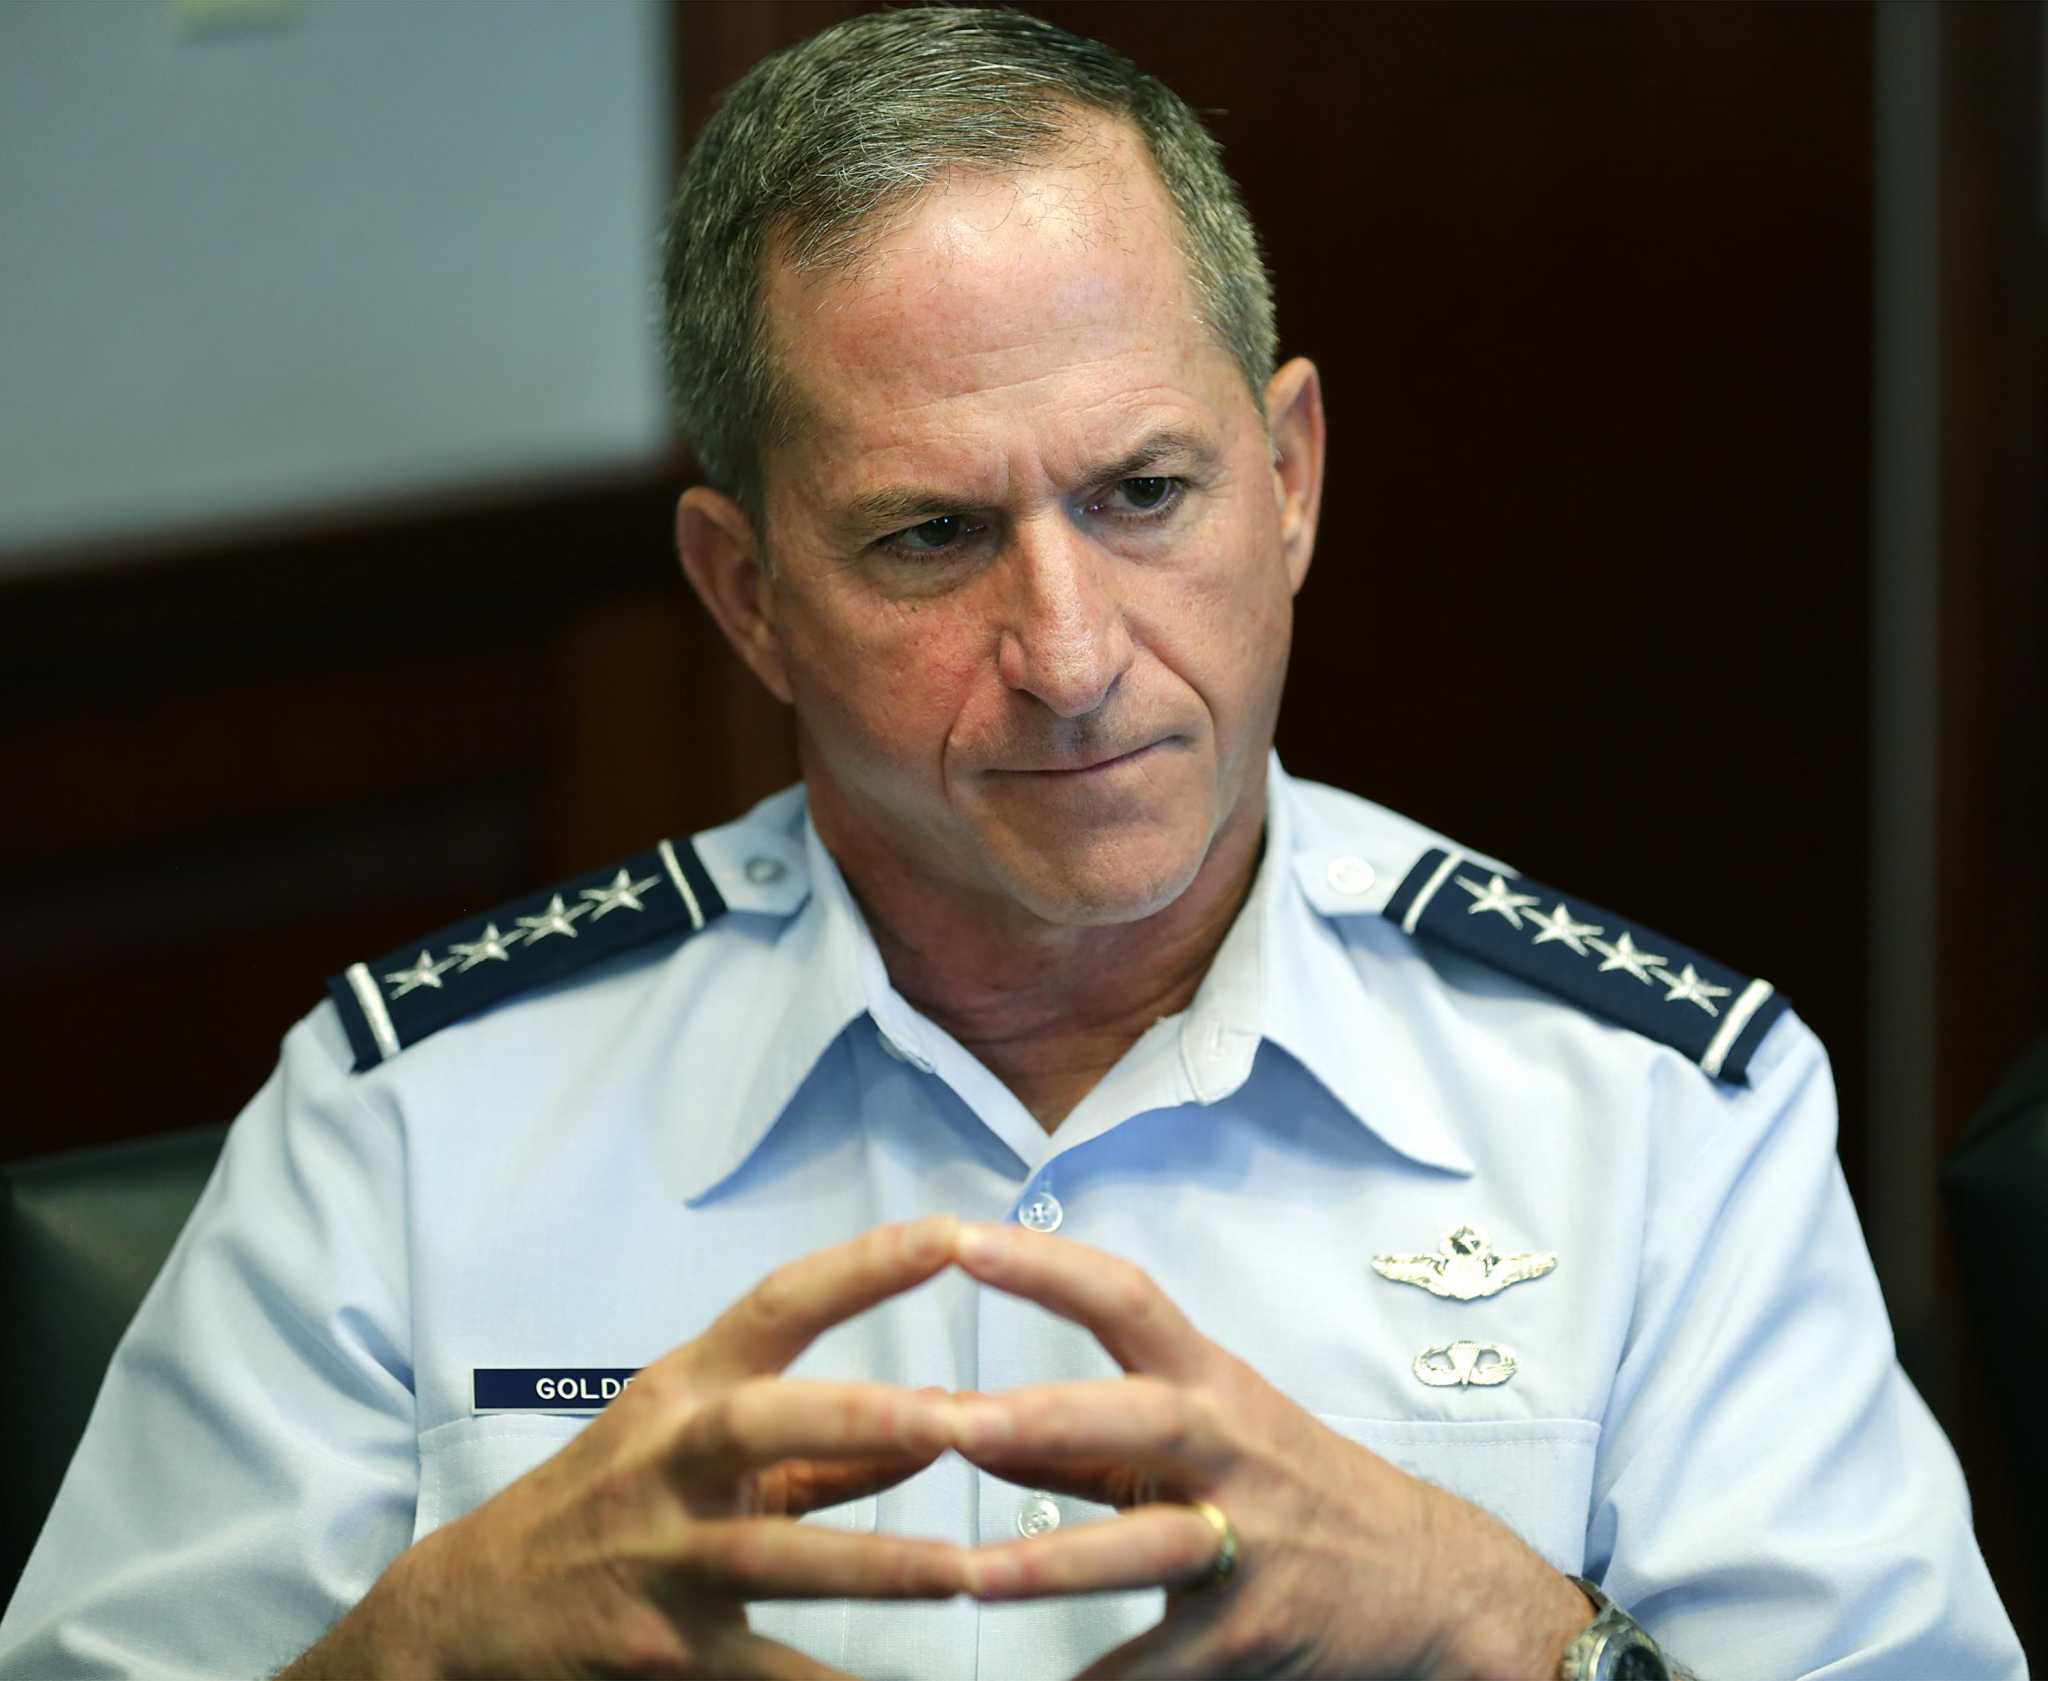 Close calls and near-misses Air Force chief has had highs, and at least one